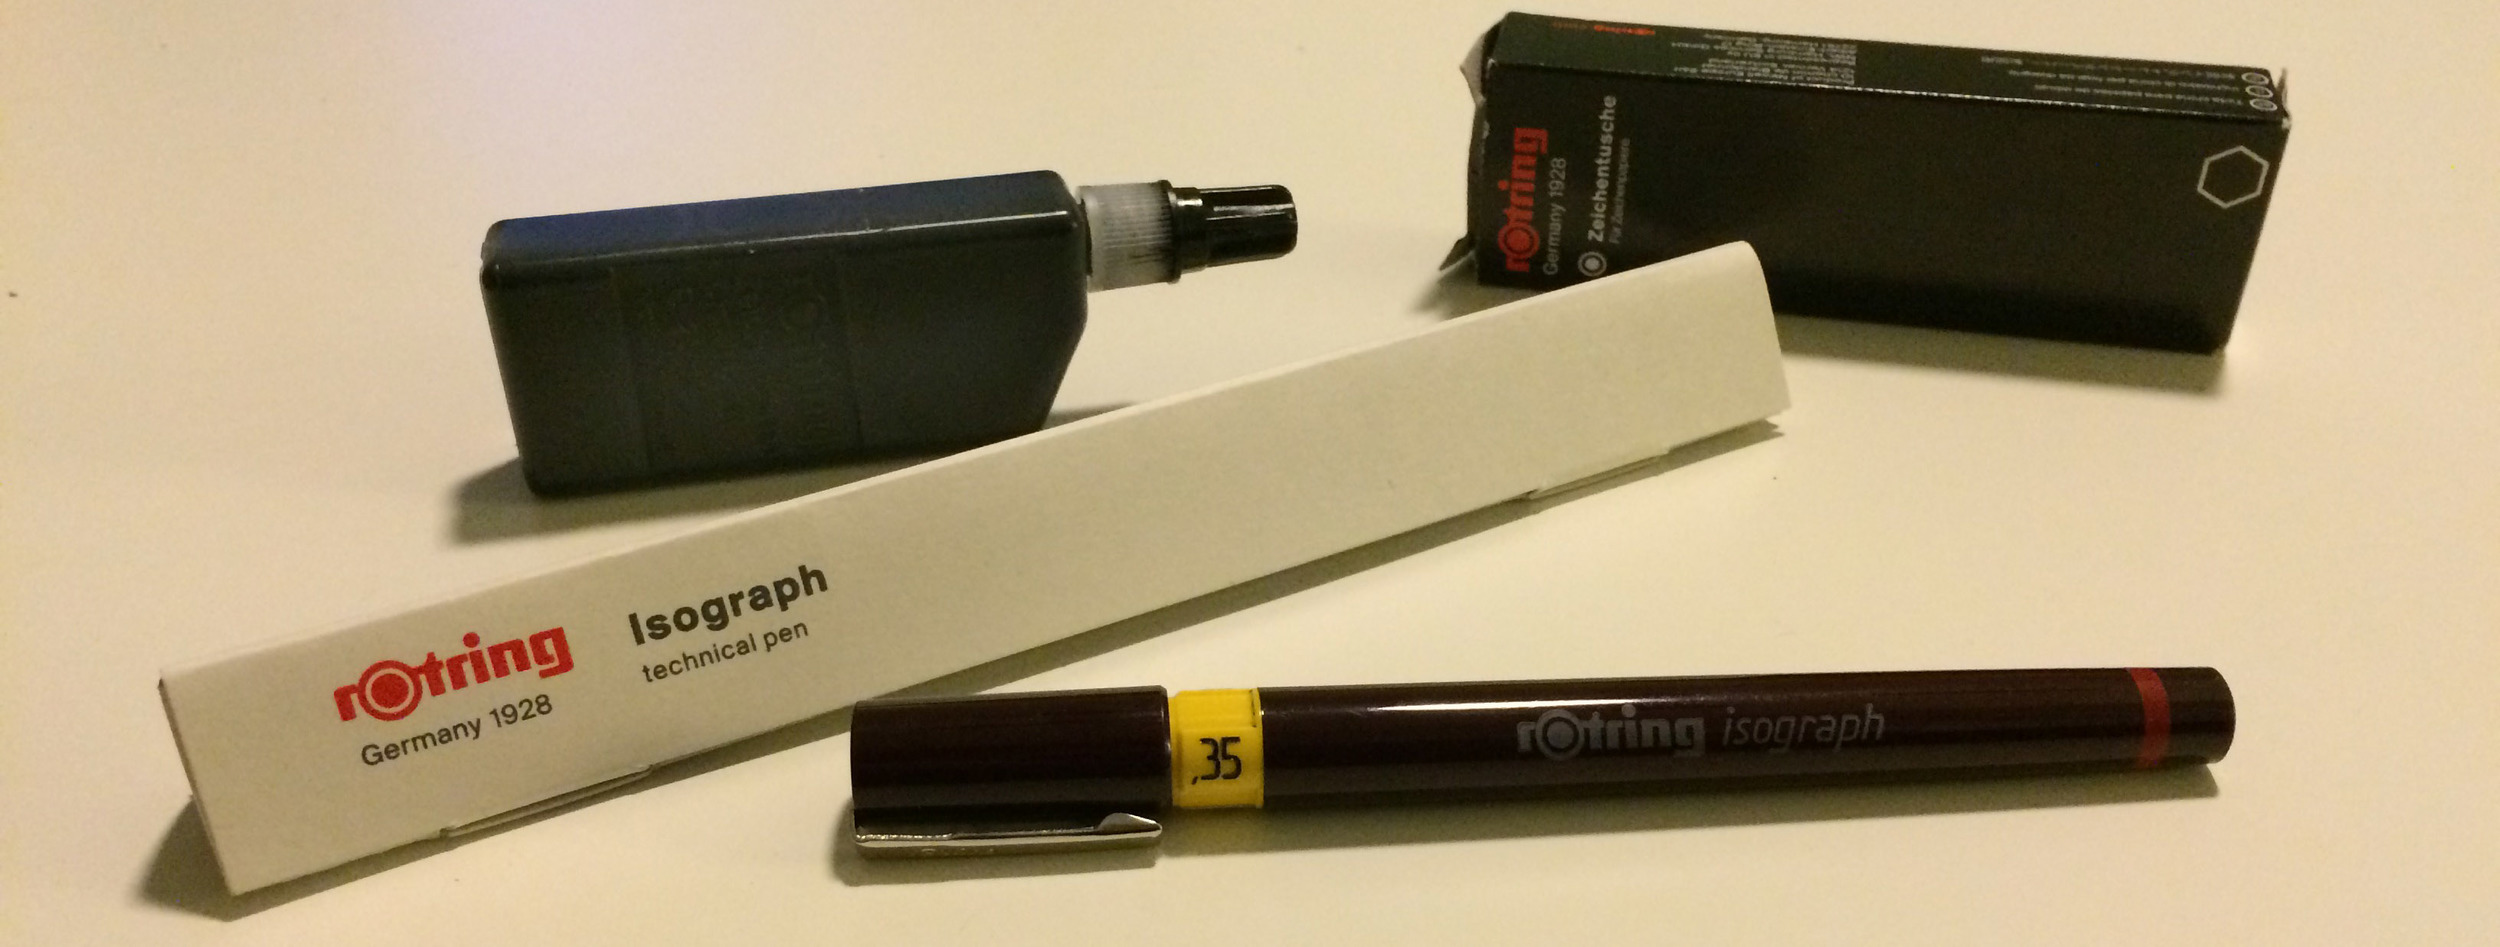 Rotring Isograph Review — The Pen Addict